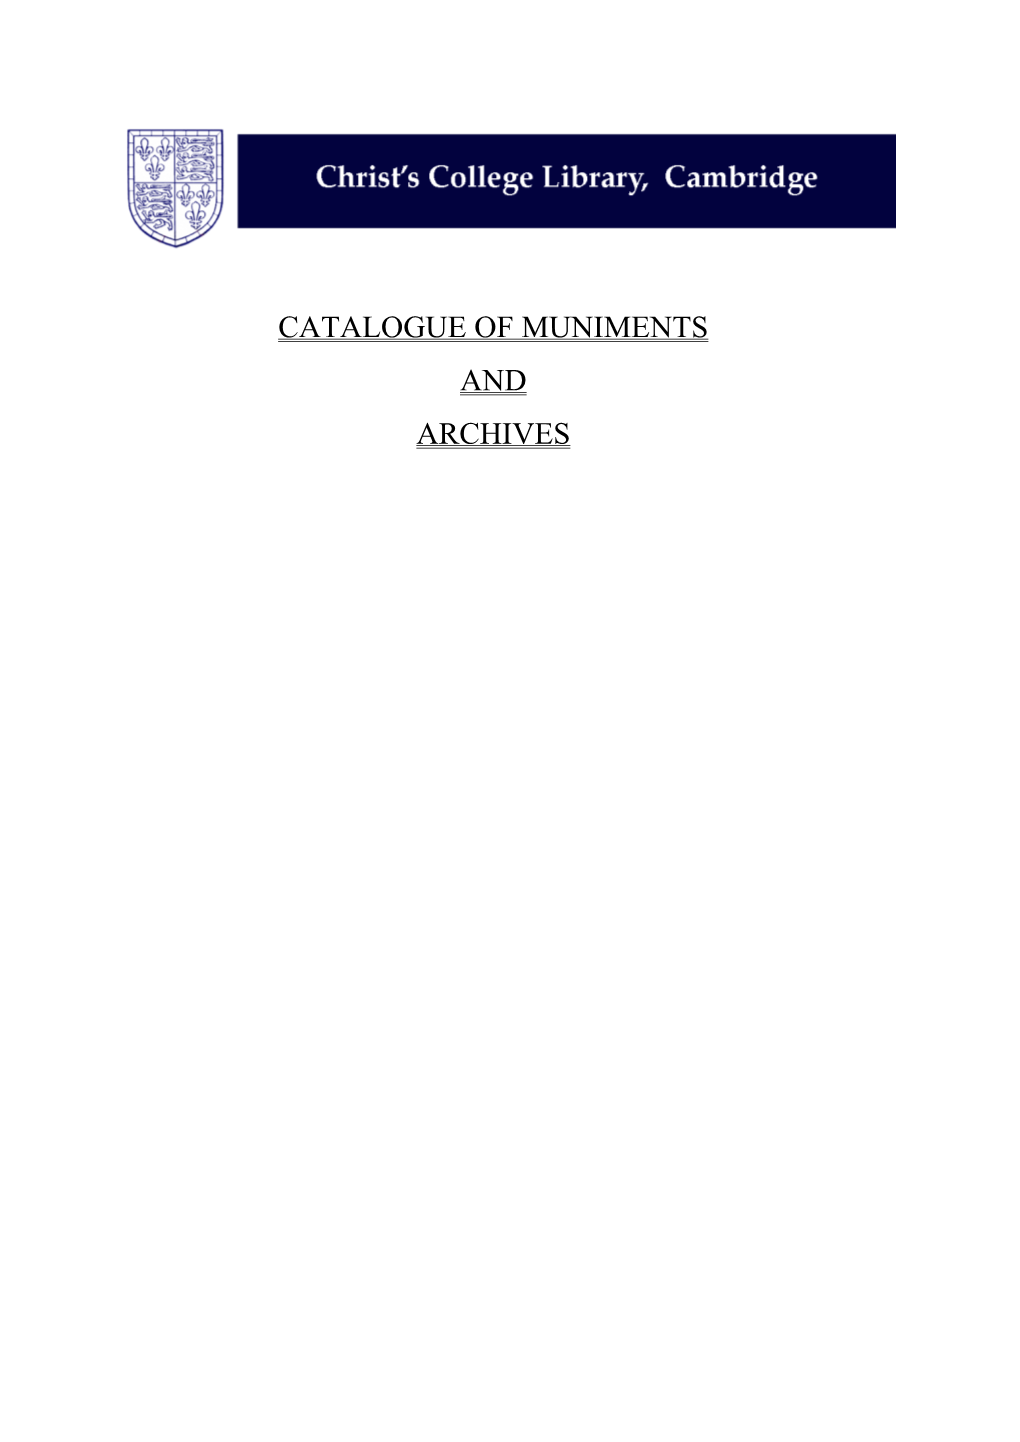 Catalogue of Muniments and Archives